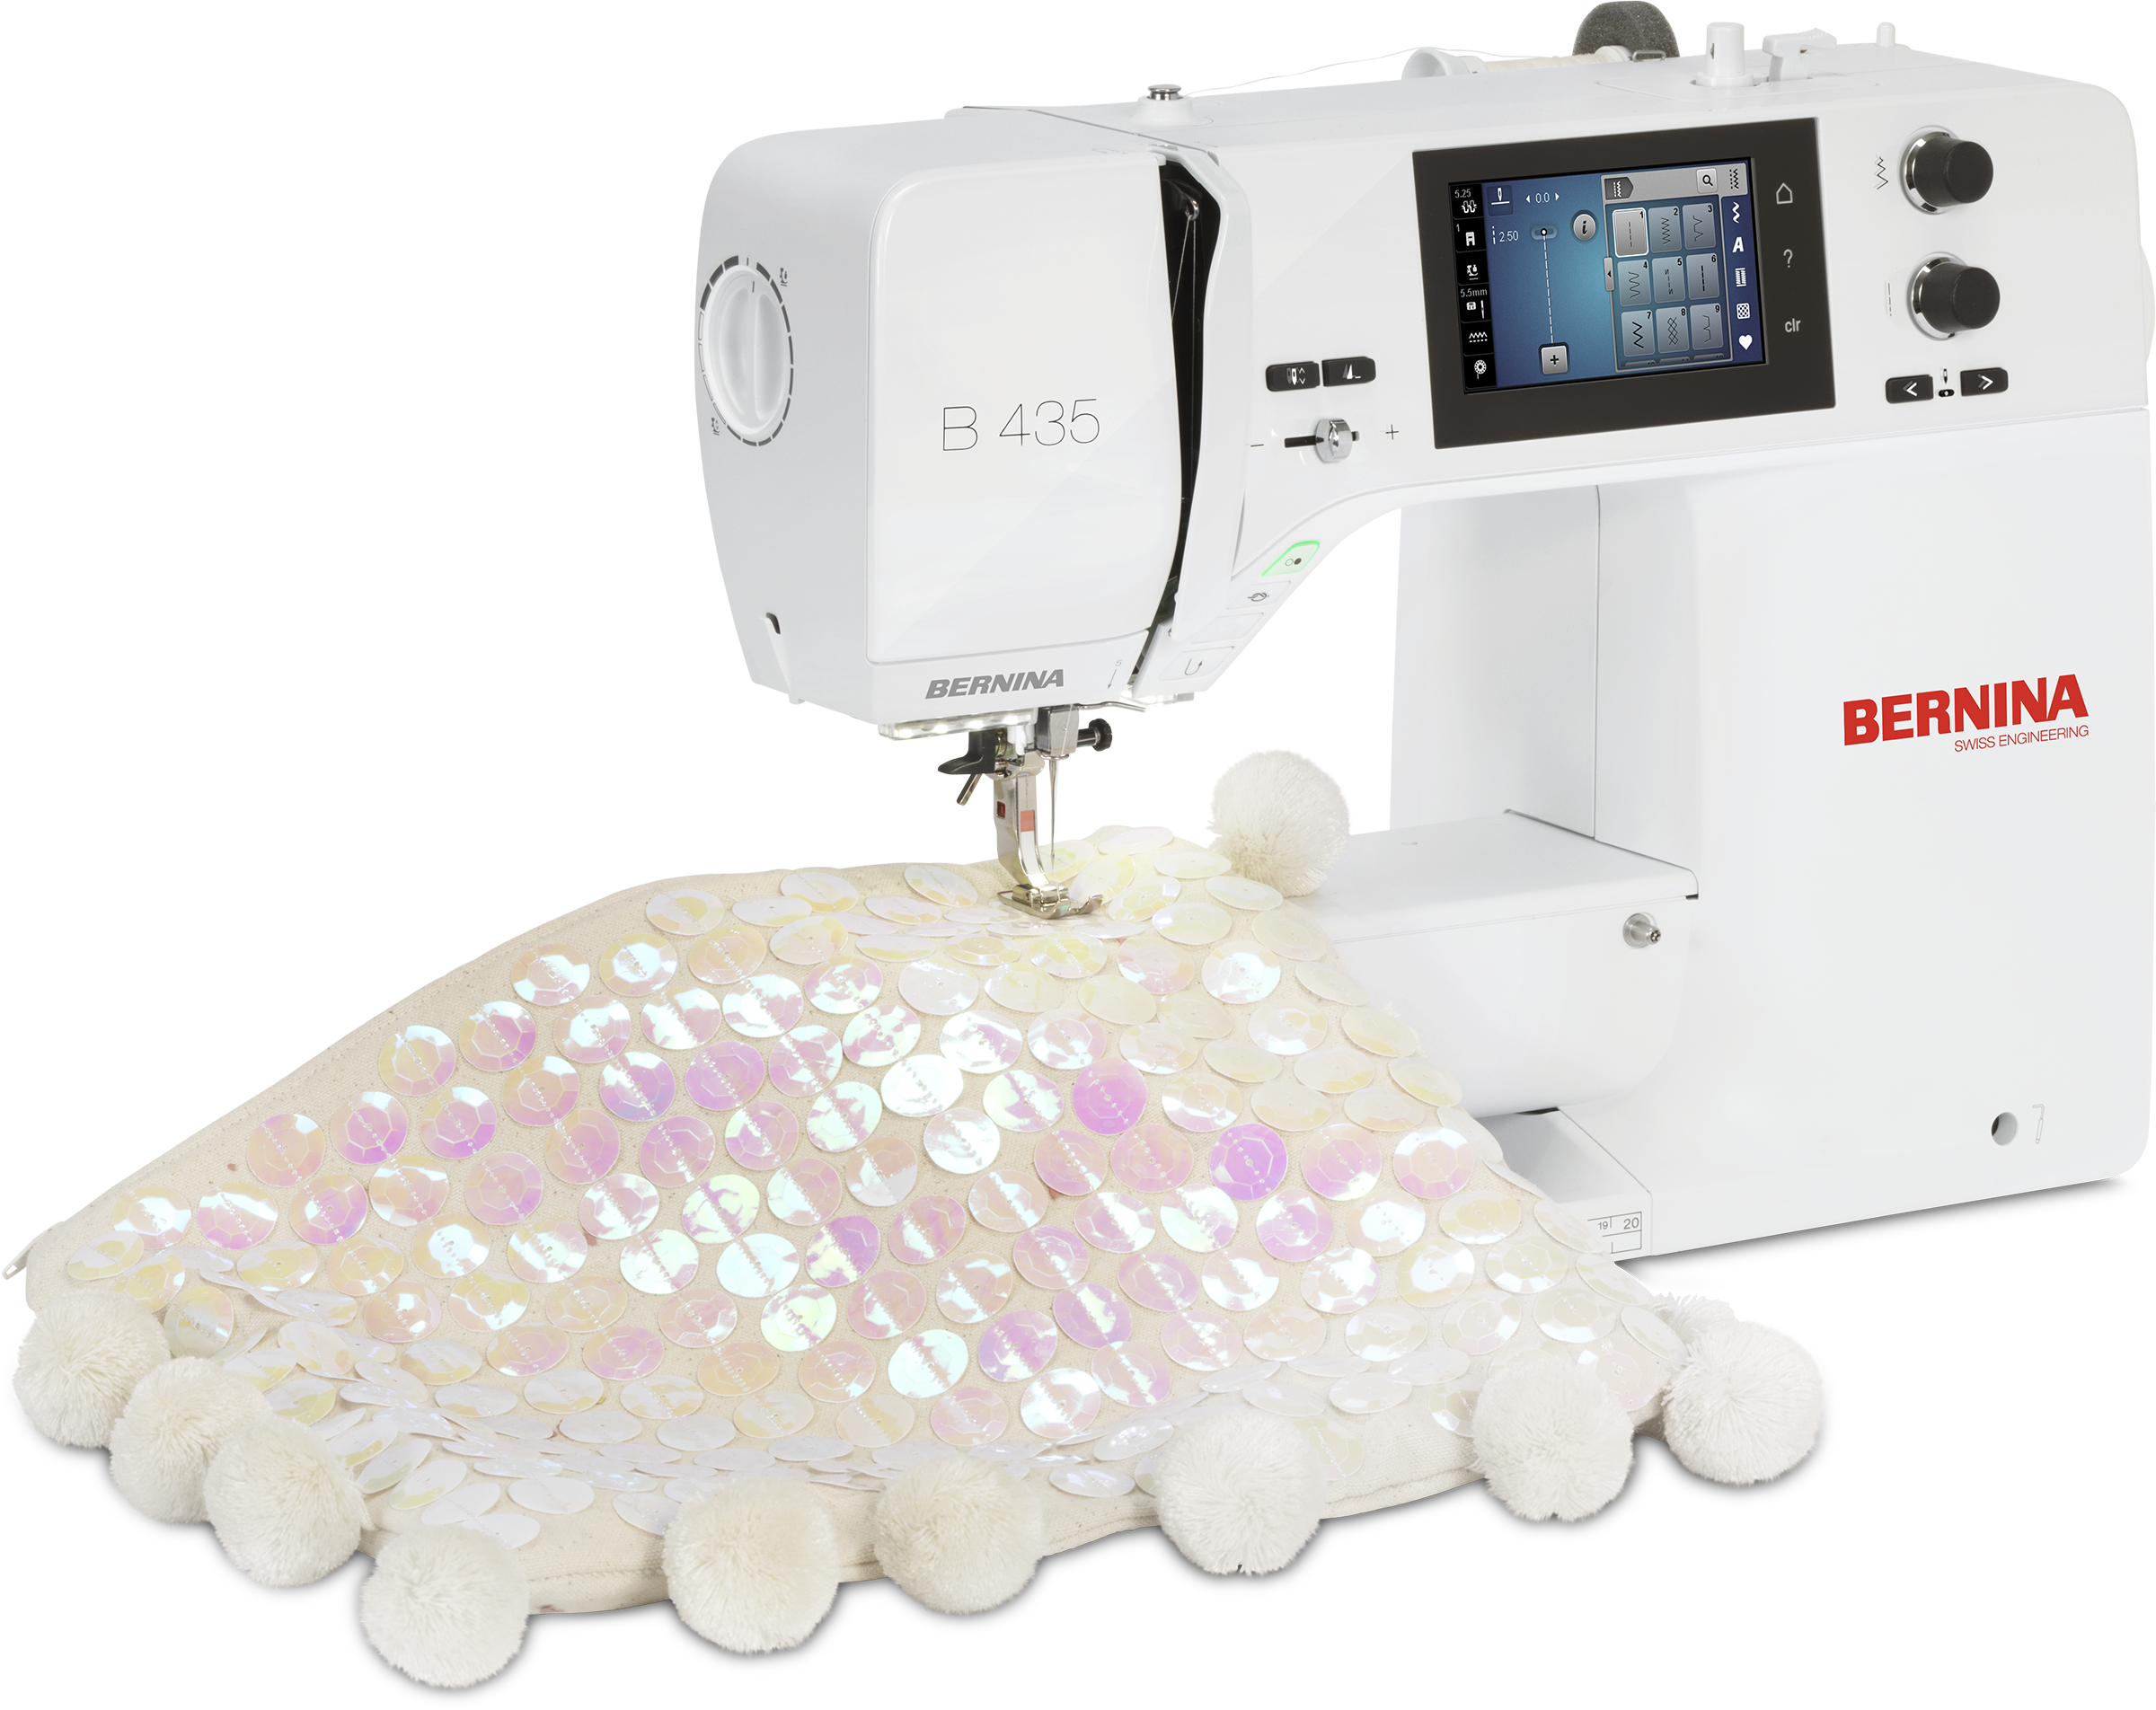 angled image of the BERNINA 435 Sewing Machine with a sewing project